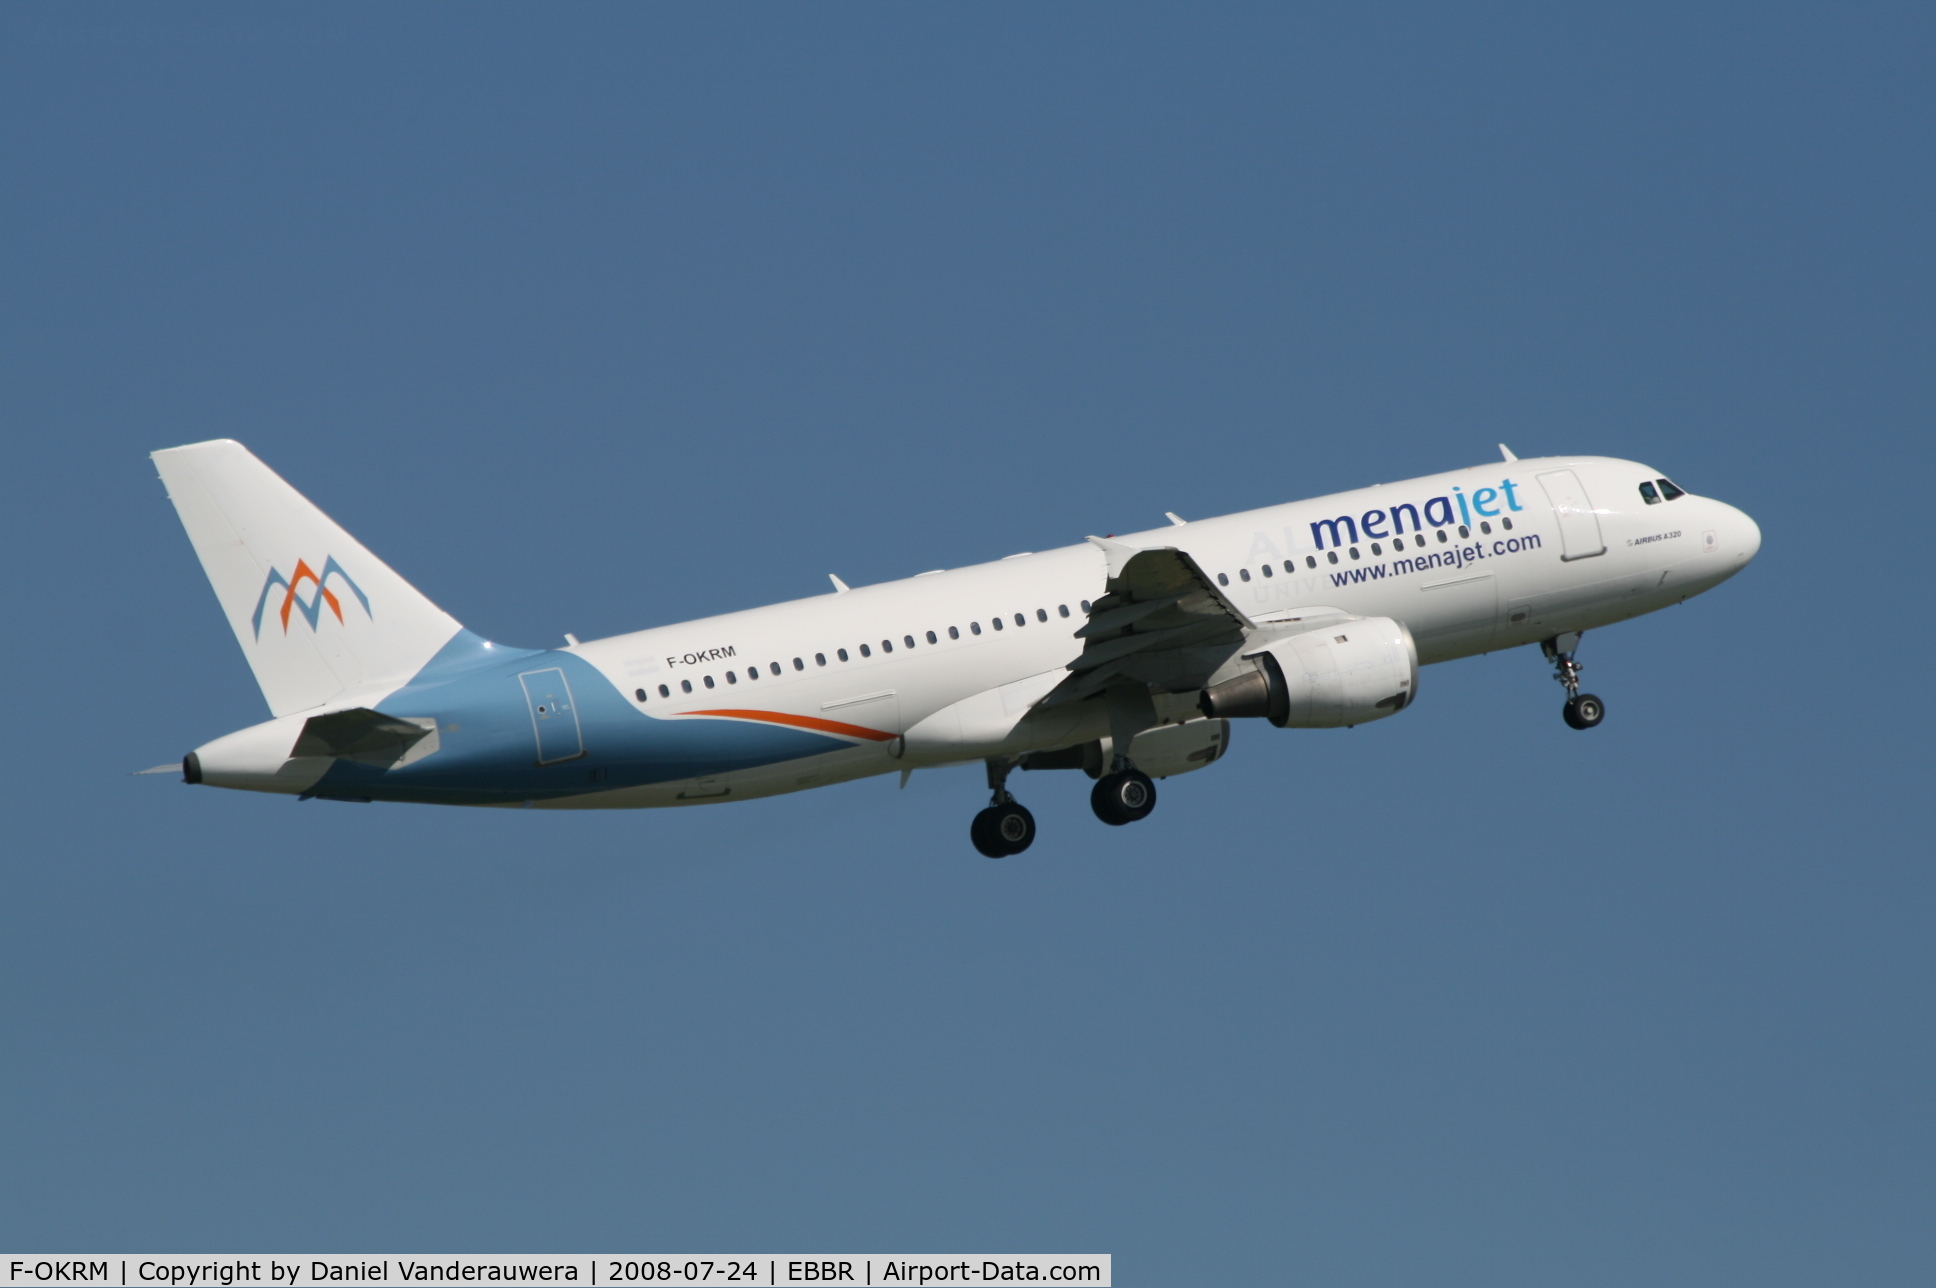 F-OKRM, 1996 Airbus A320-211 C/N 615, Taking off from RWY 07R